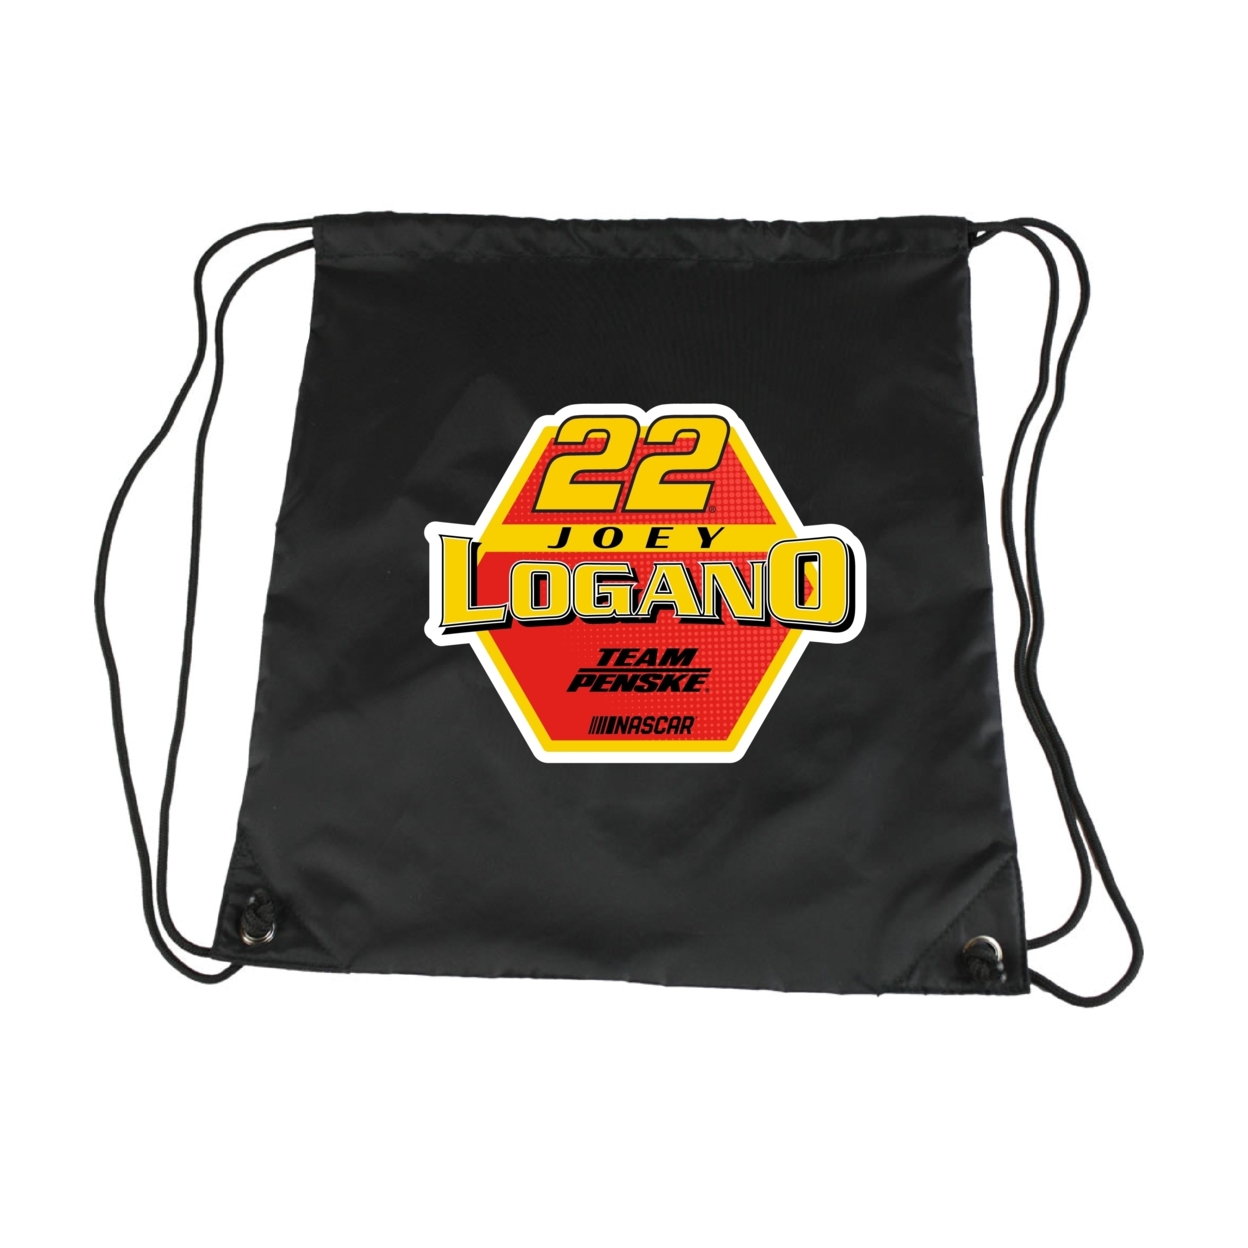 #22 Joey Logano Officially Licensed Nascar Cinch Bag With Drawstring